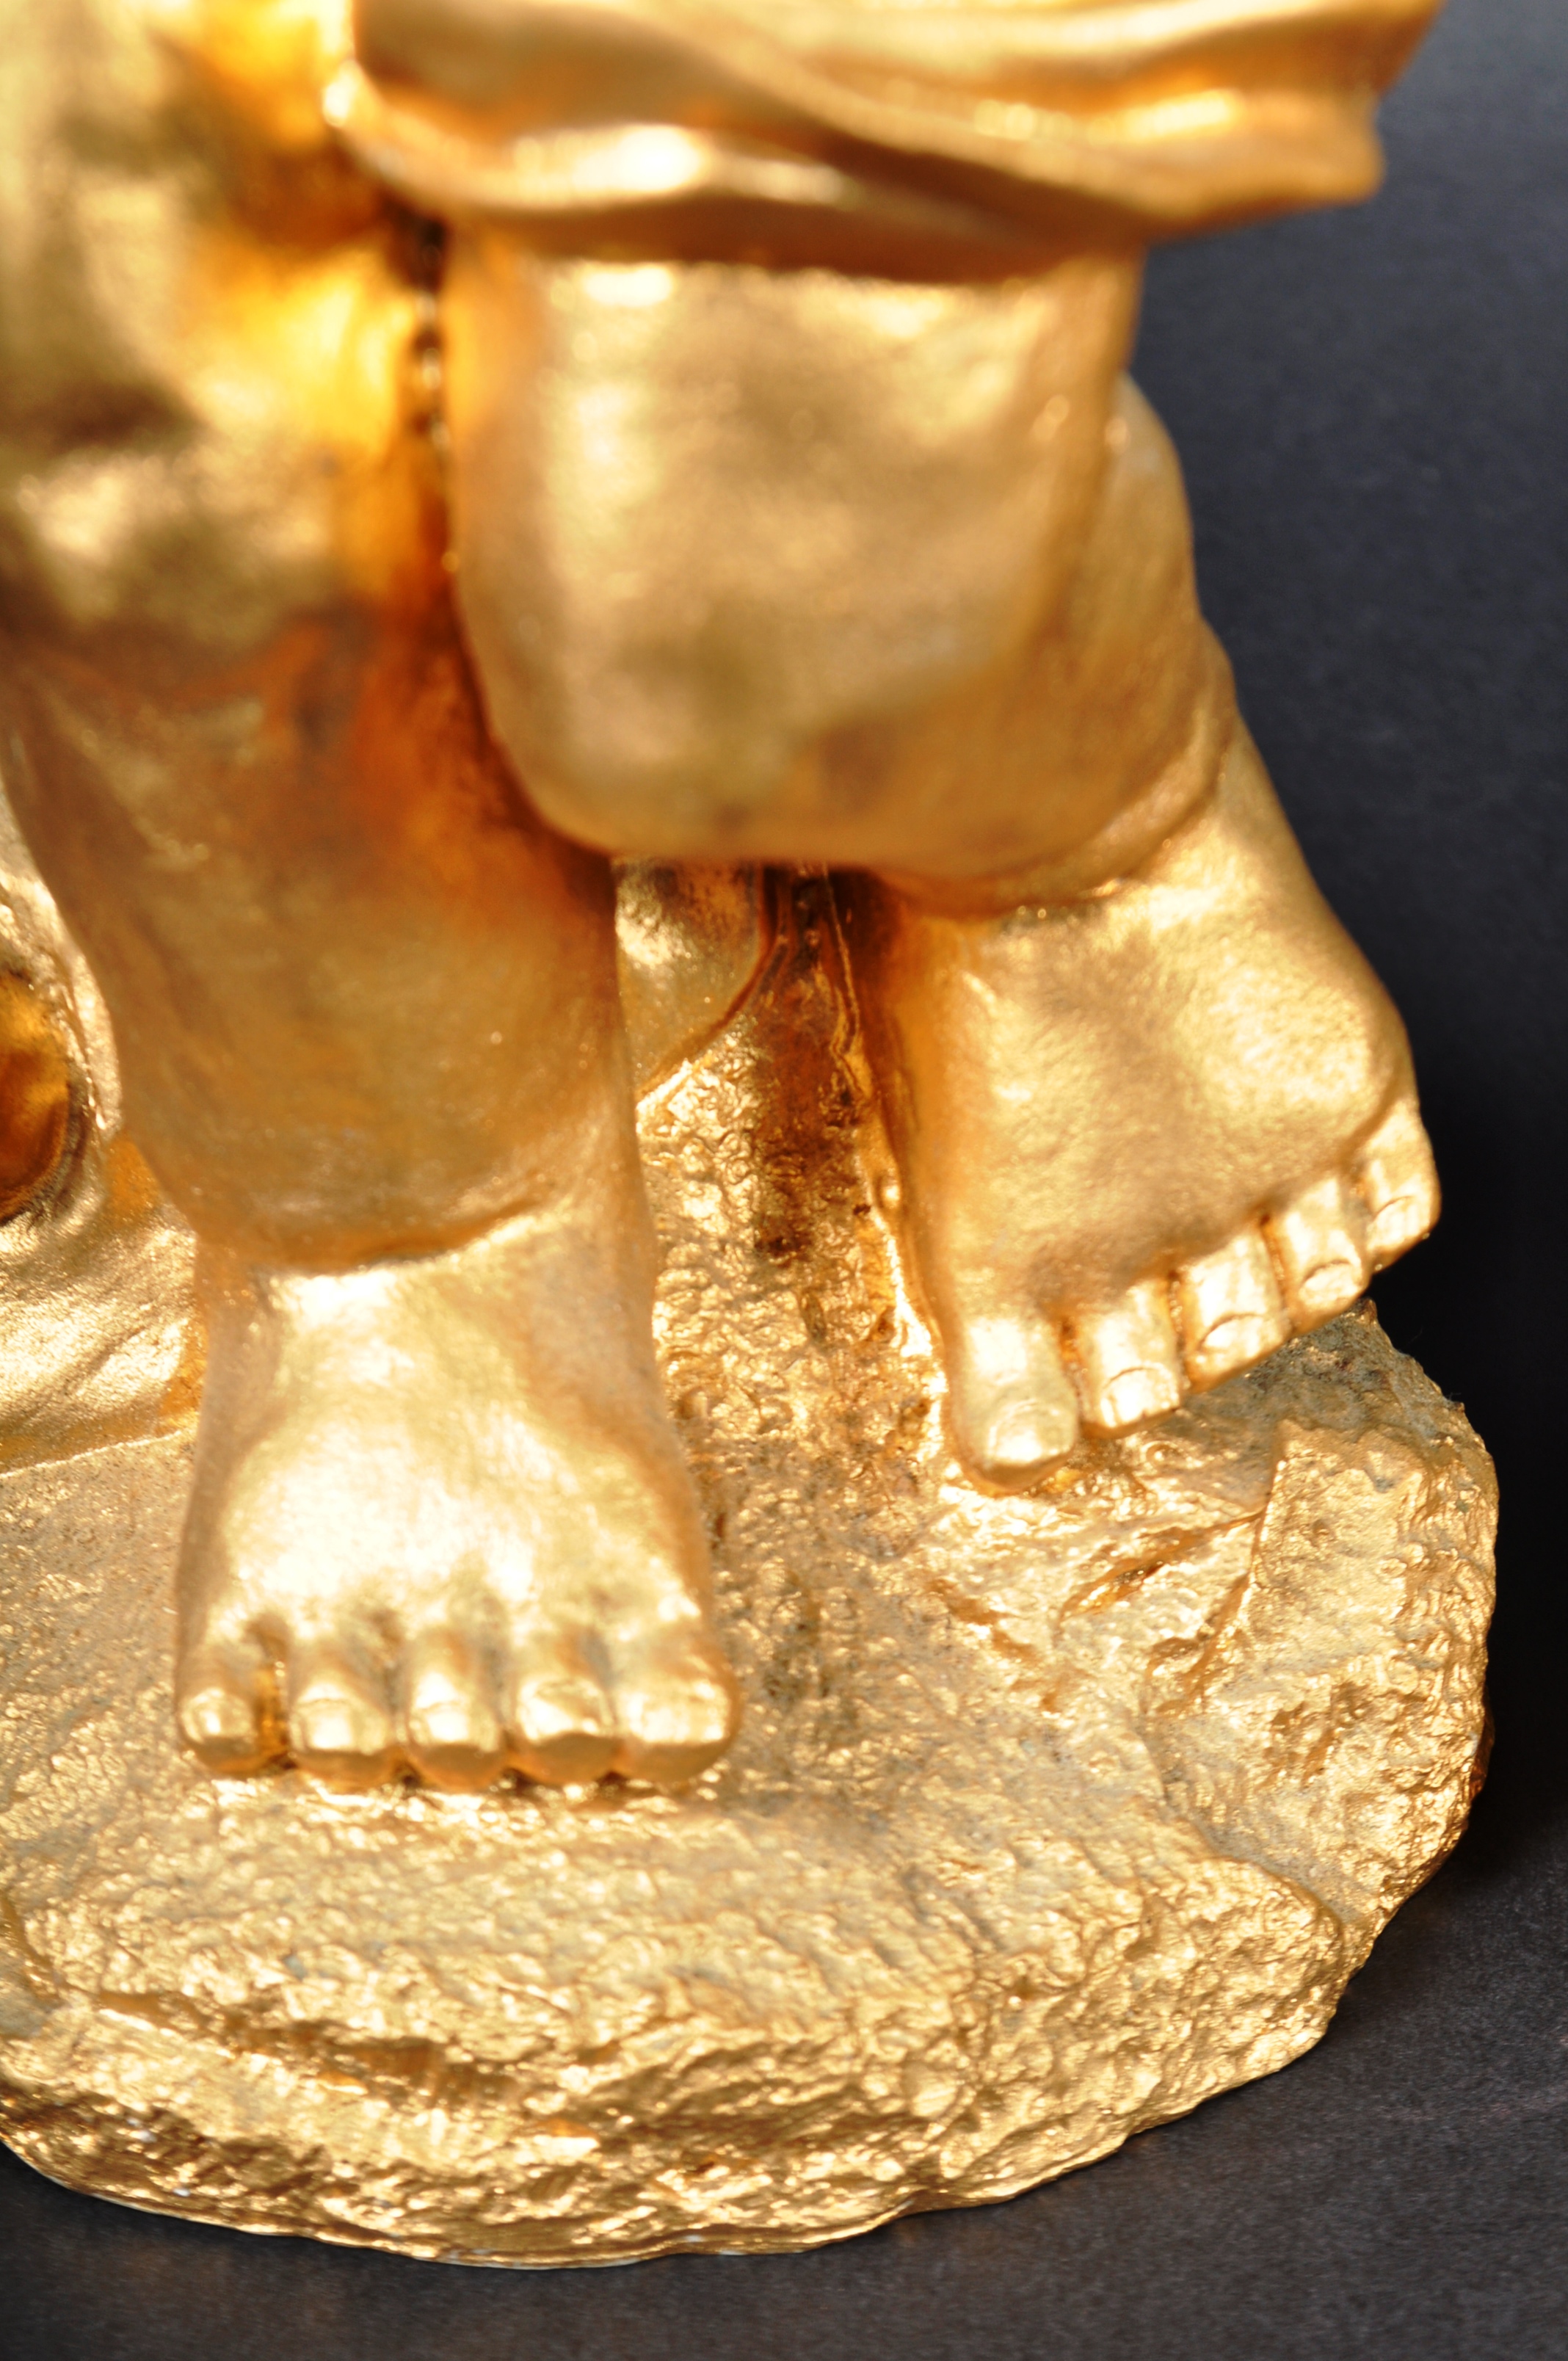 PAIR OF CONTEMPORARY GILT RESIN FIGURES MOULDED AS CHERUBS - Image 5 of 10